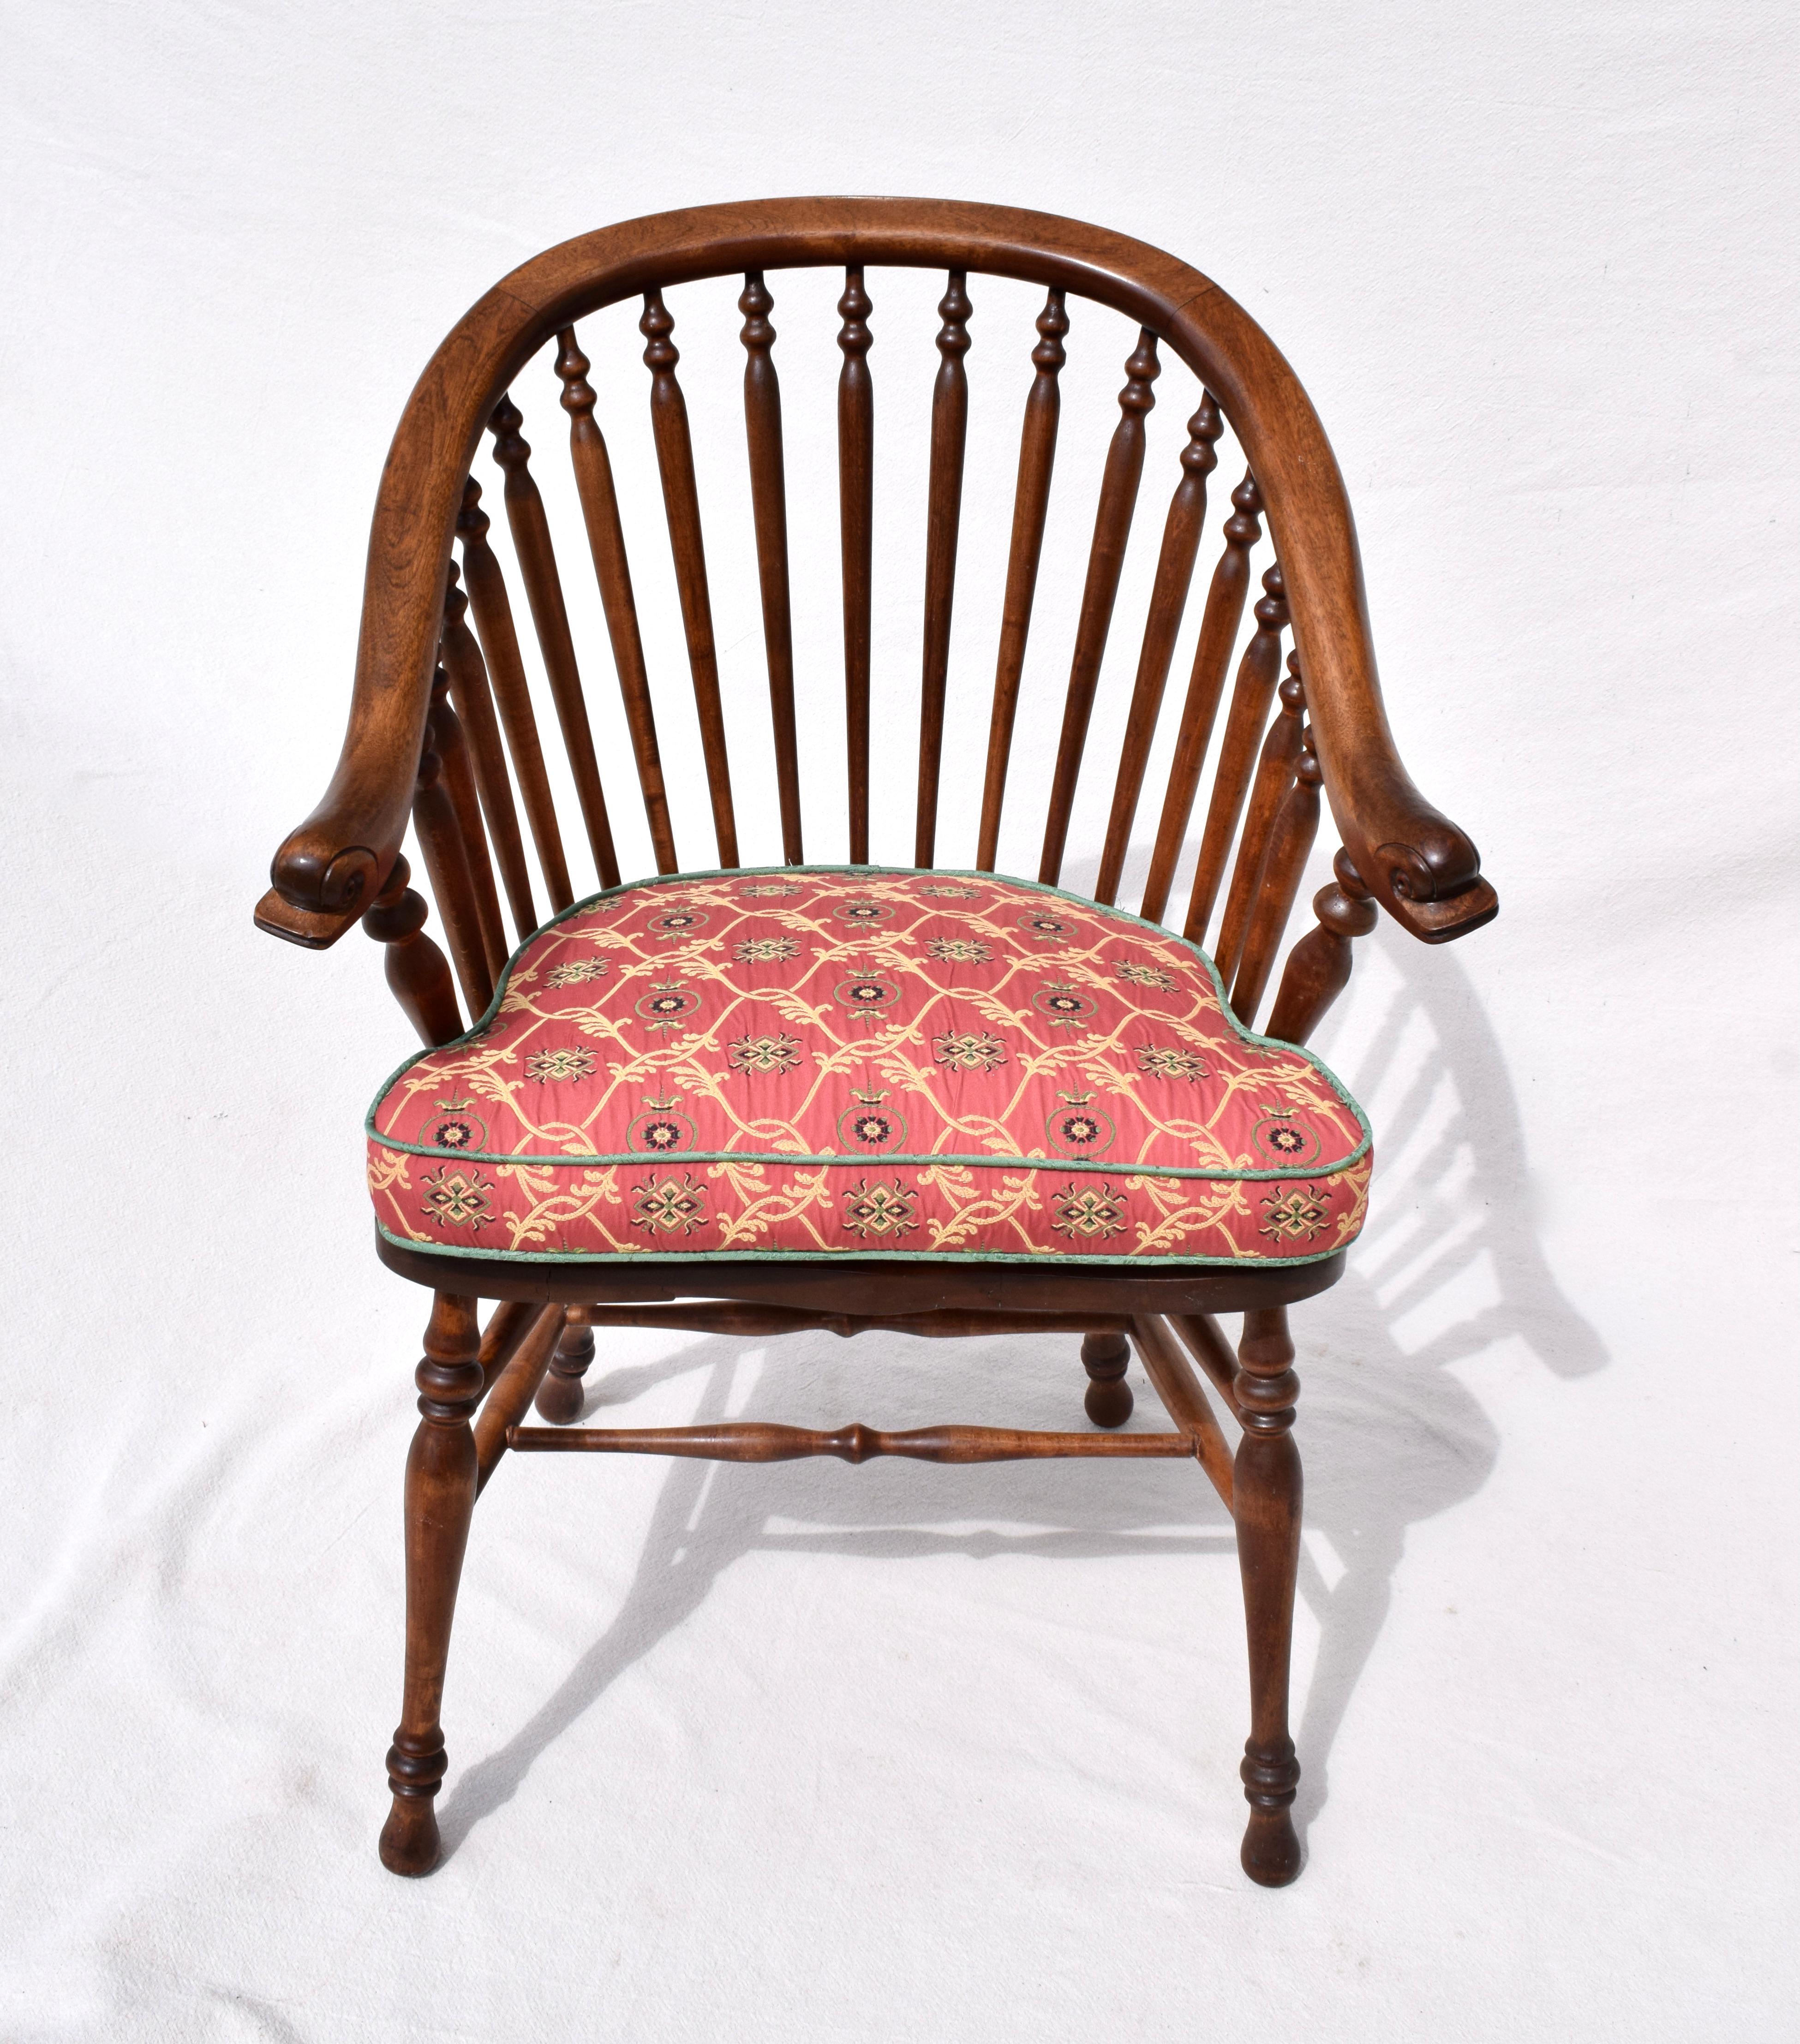 A scarcely seen 19th c. spindle back barrel chair with George Hunzinger & Windsor chair influences. Marvelous character in the unusual splayed & carved dolphin heads arms, bent surround, turned spindles, stretchers & legs with mortise & tenon